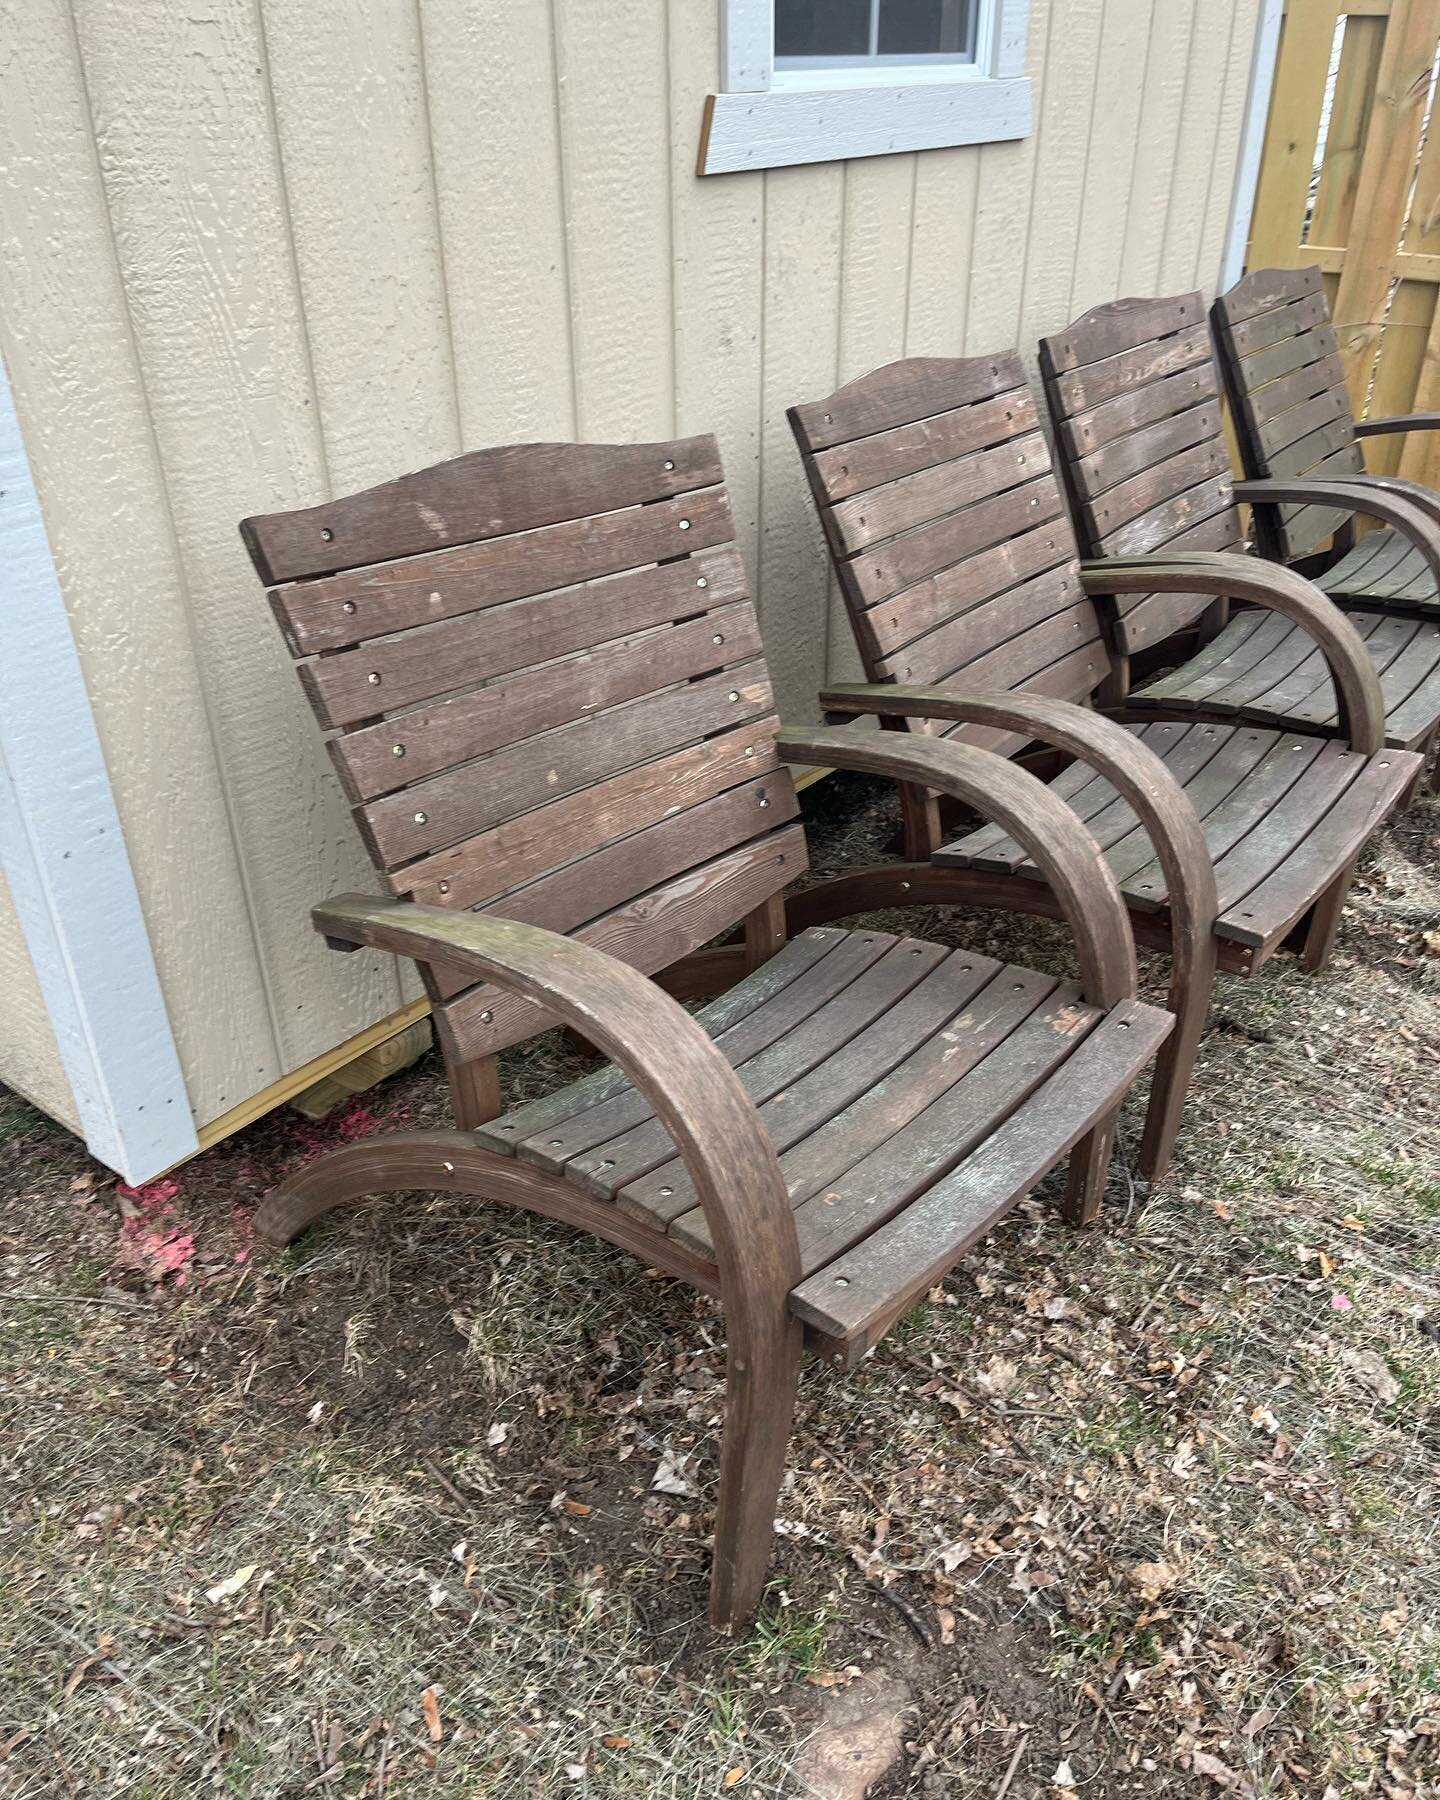 They&rsquo;re here! I packed our boys in our truck and on our morning &ldquo;off&rdquo; we went and brought these cool chairs home!

They&rsquo;re solid wood and strong and after a little sanding &amp; refinishing will be good as new!

Help me decide